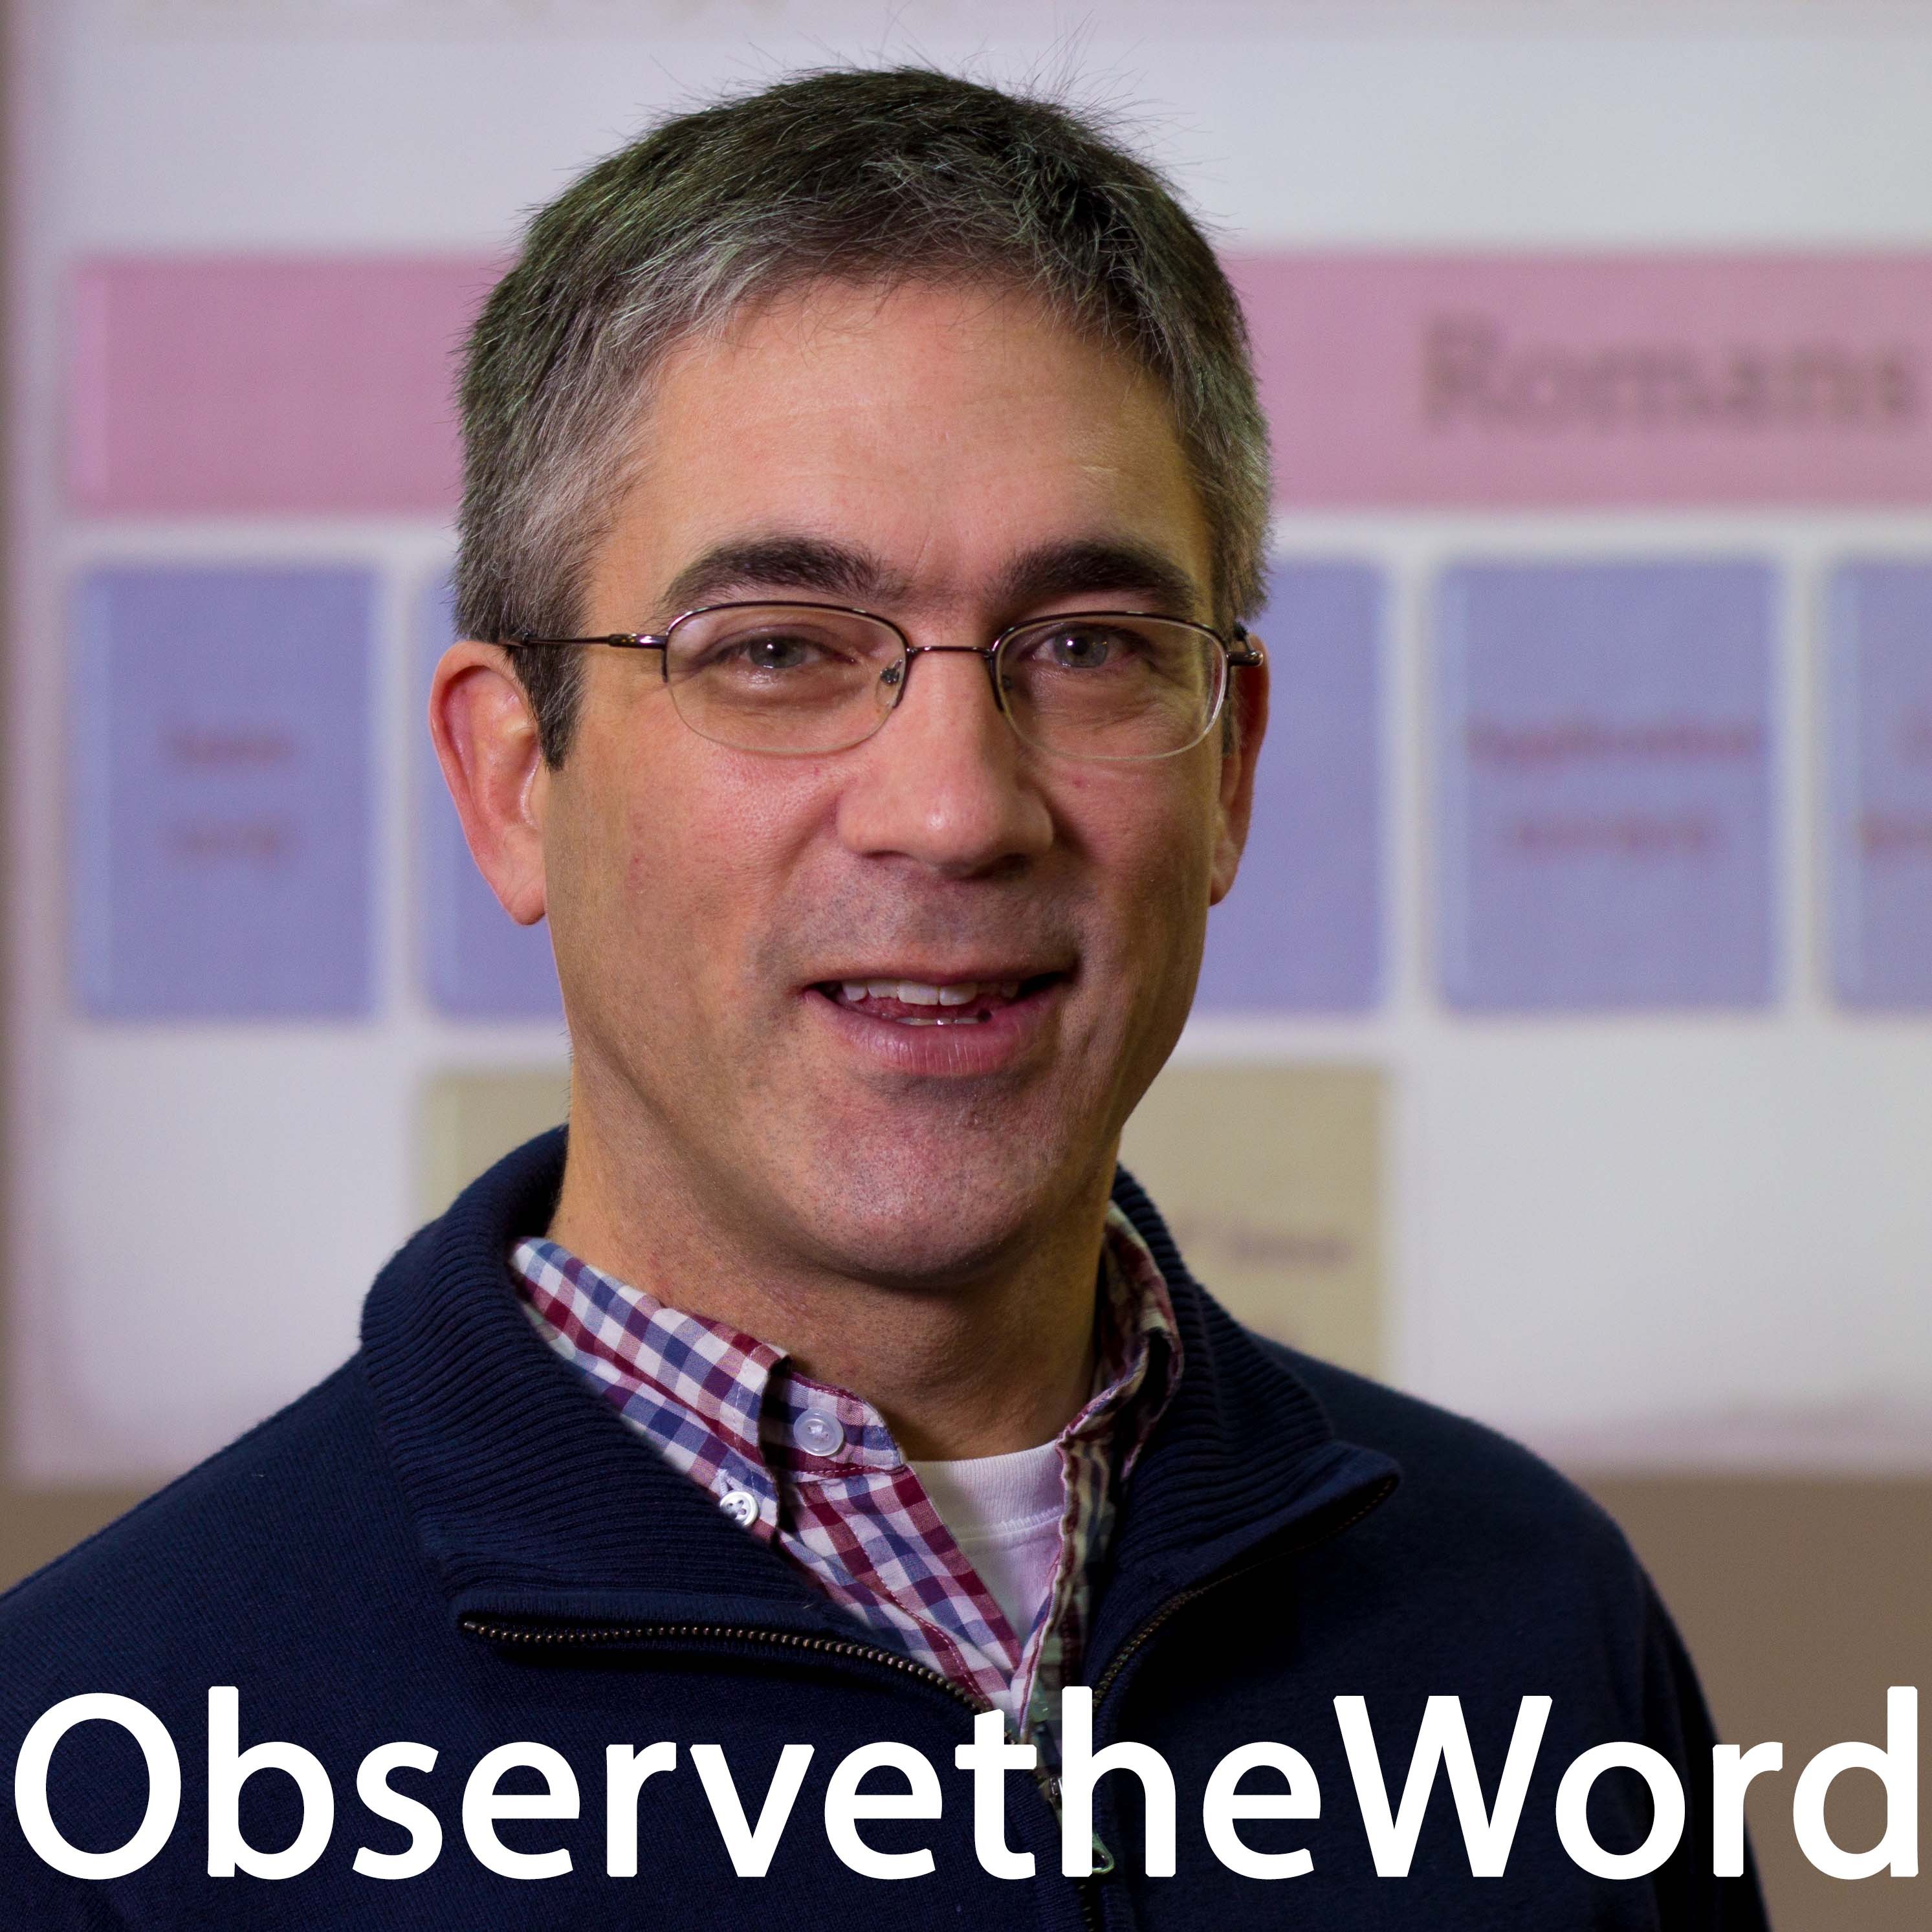 Observe the Word